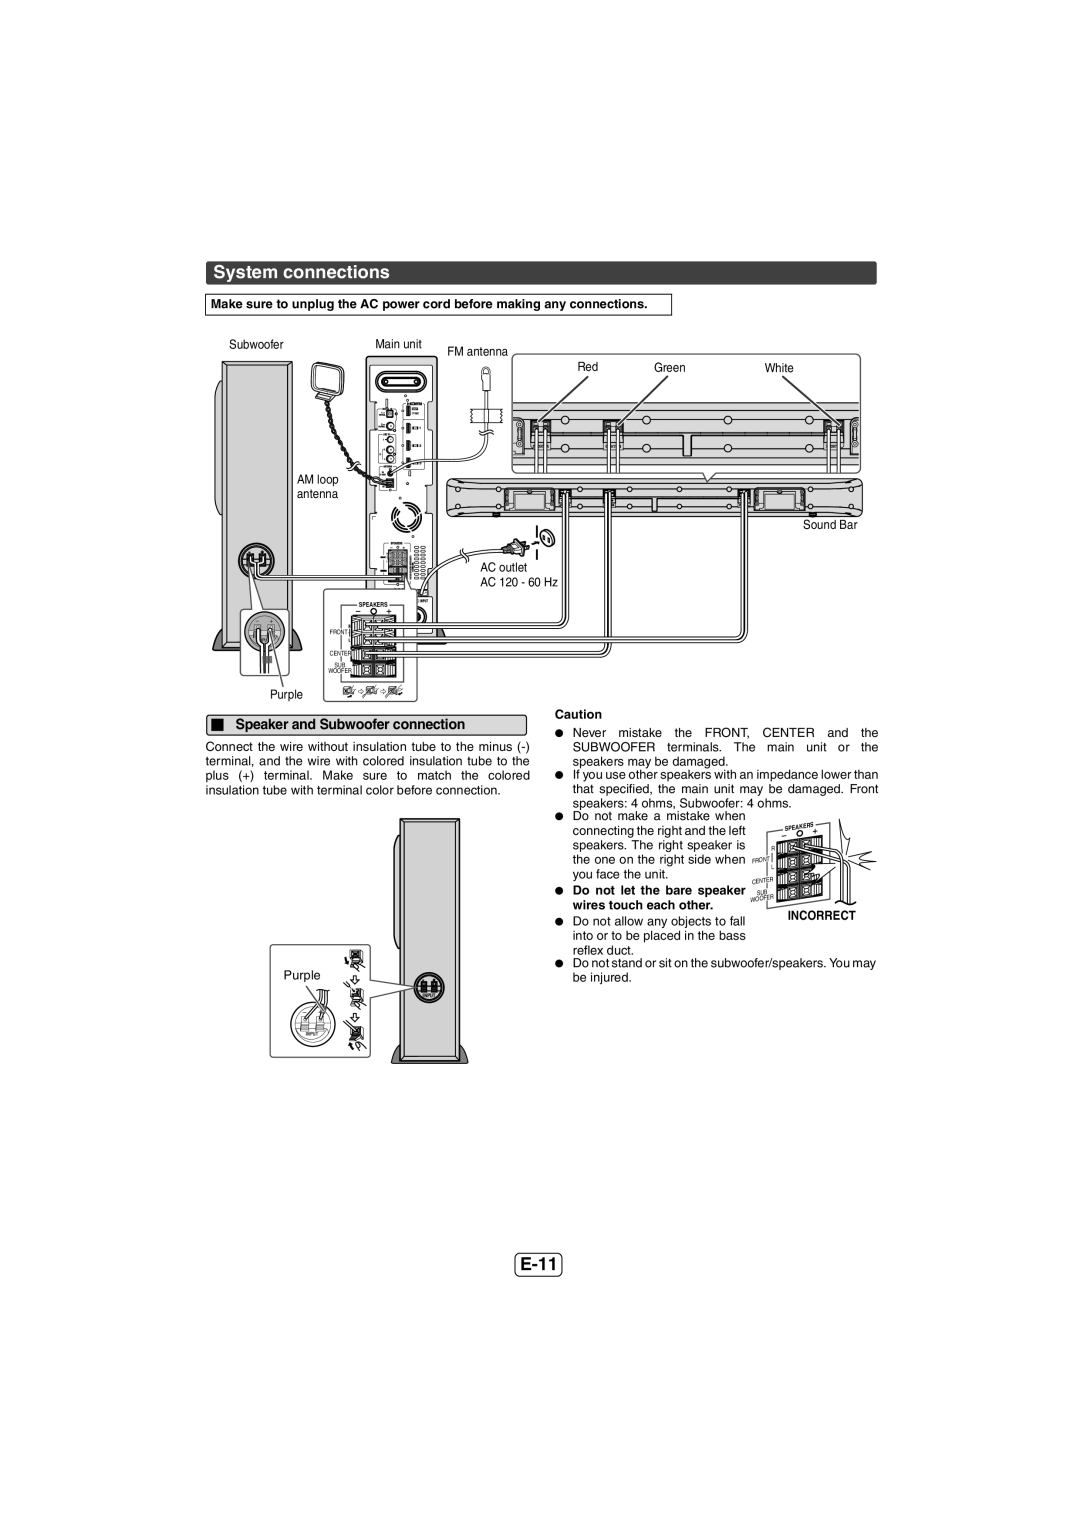 Sharp HT-SB600, HTSB600 operation manual System connections, E-11 